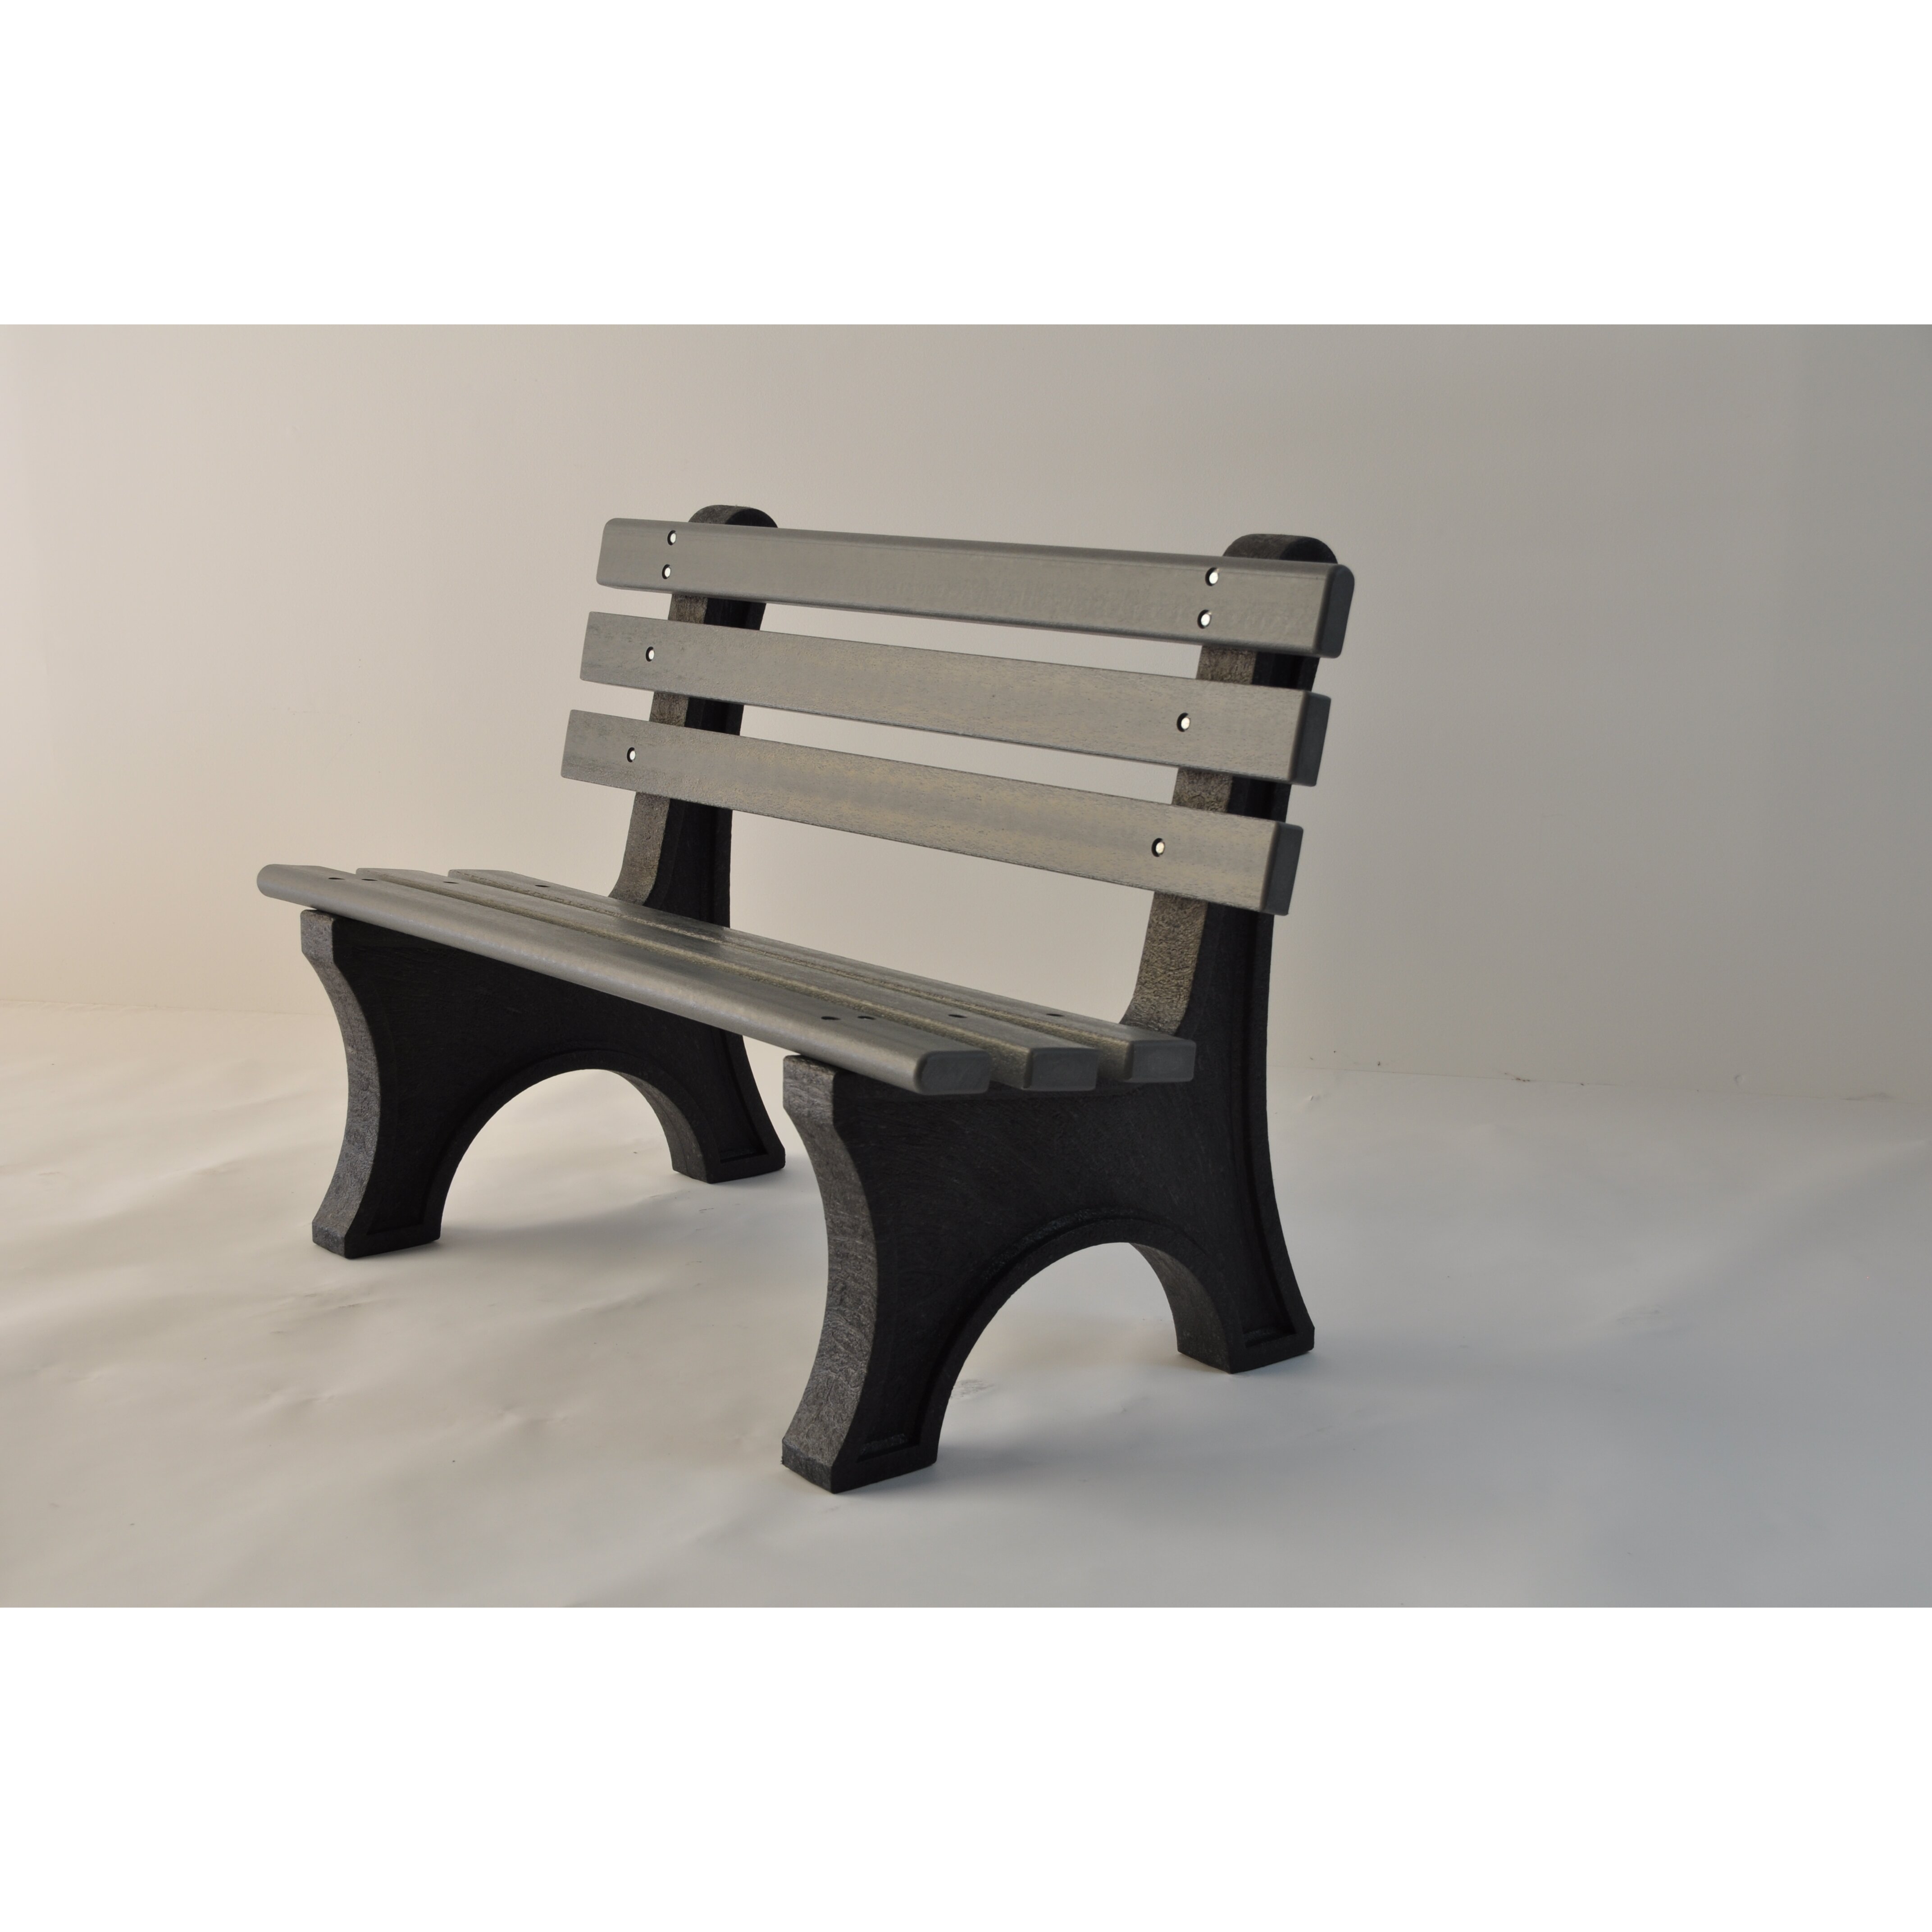 Frog Furnishings Central Park Recycled Plastic Park Bench And Reviews Wayfair 